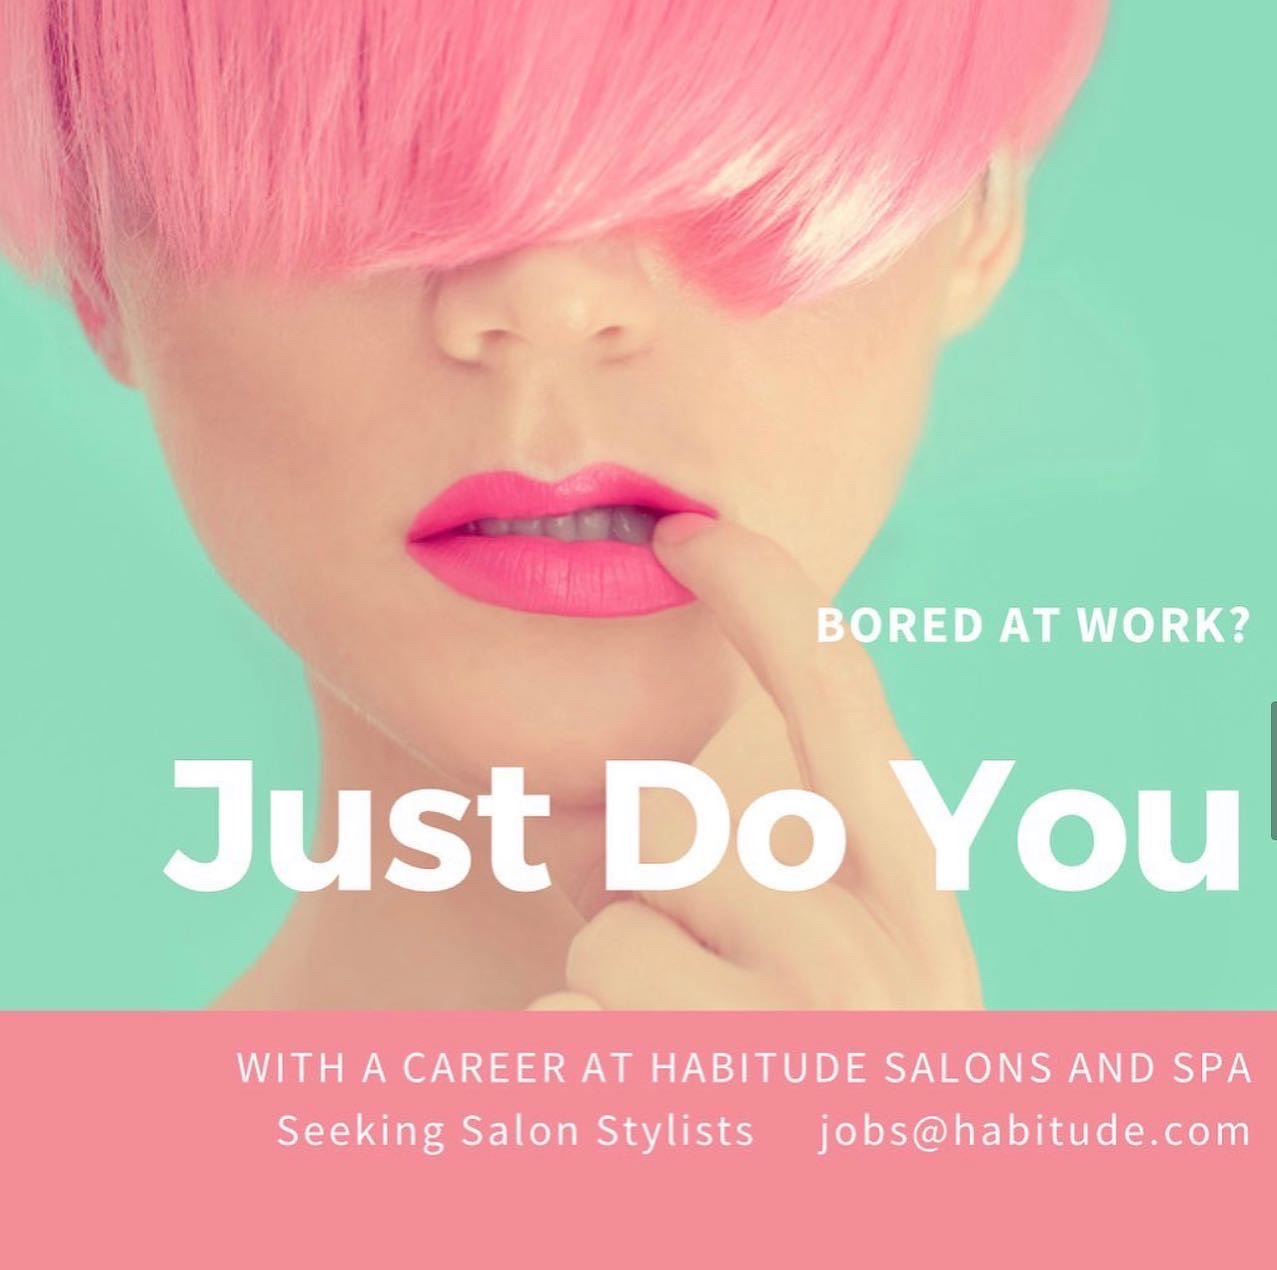 Just do you - careers at Habitude